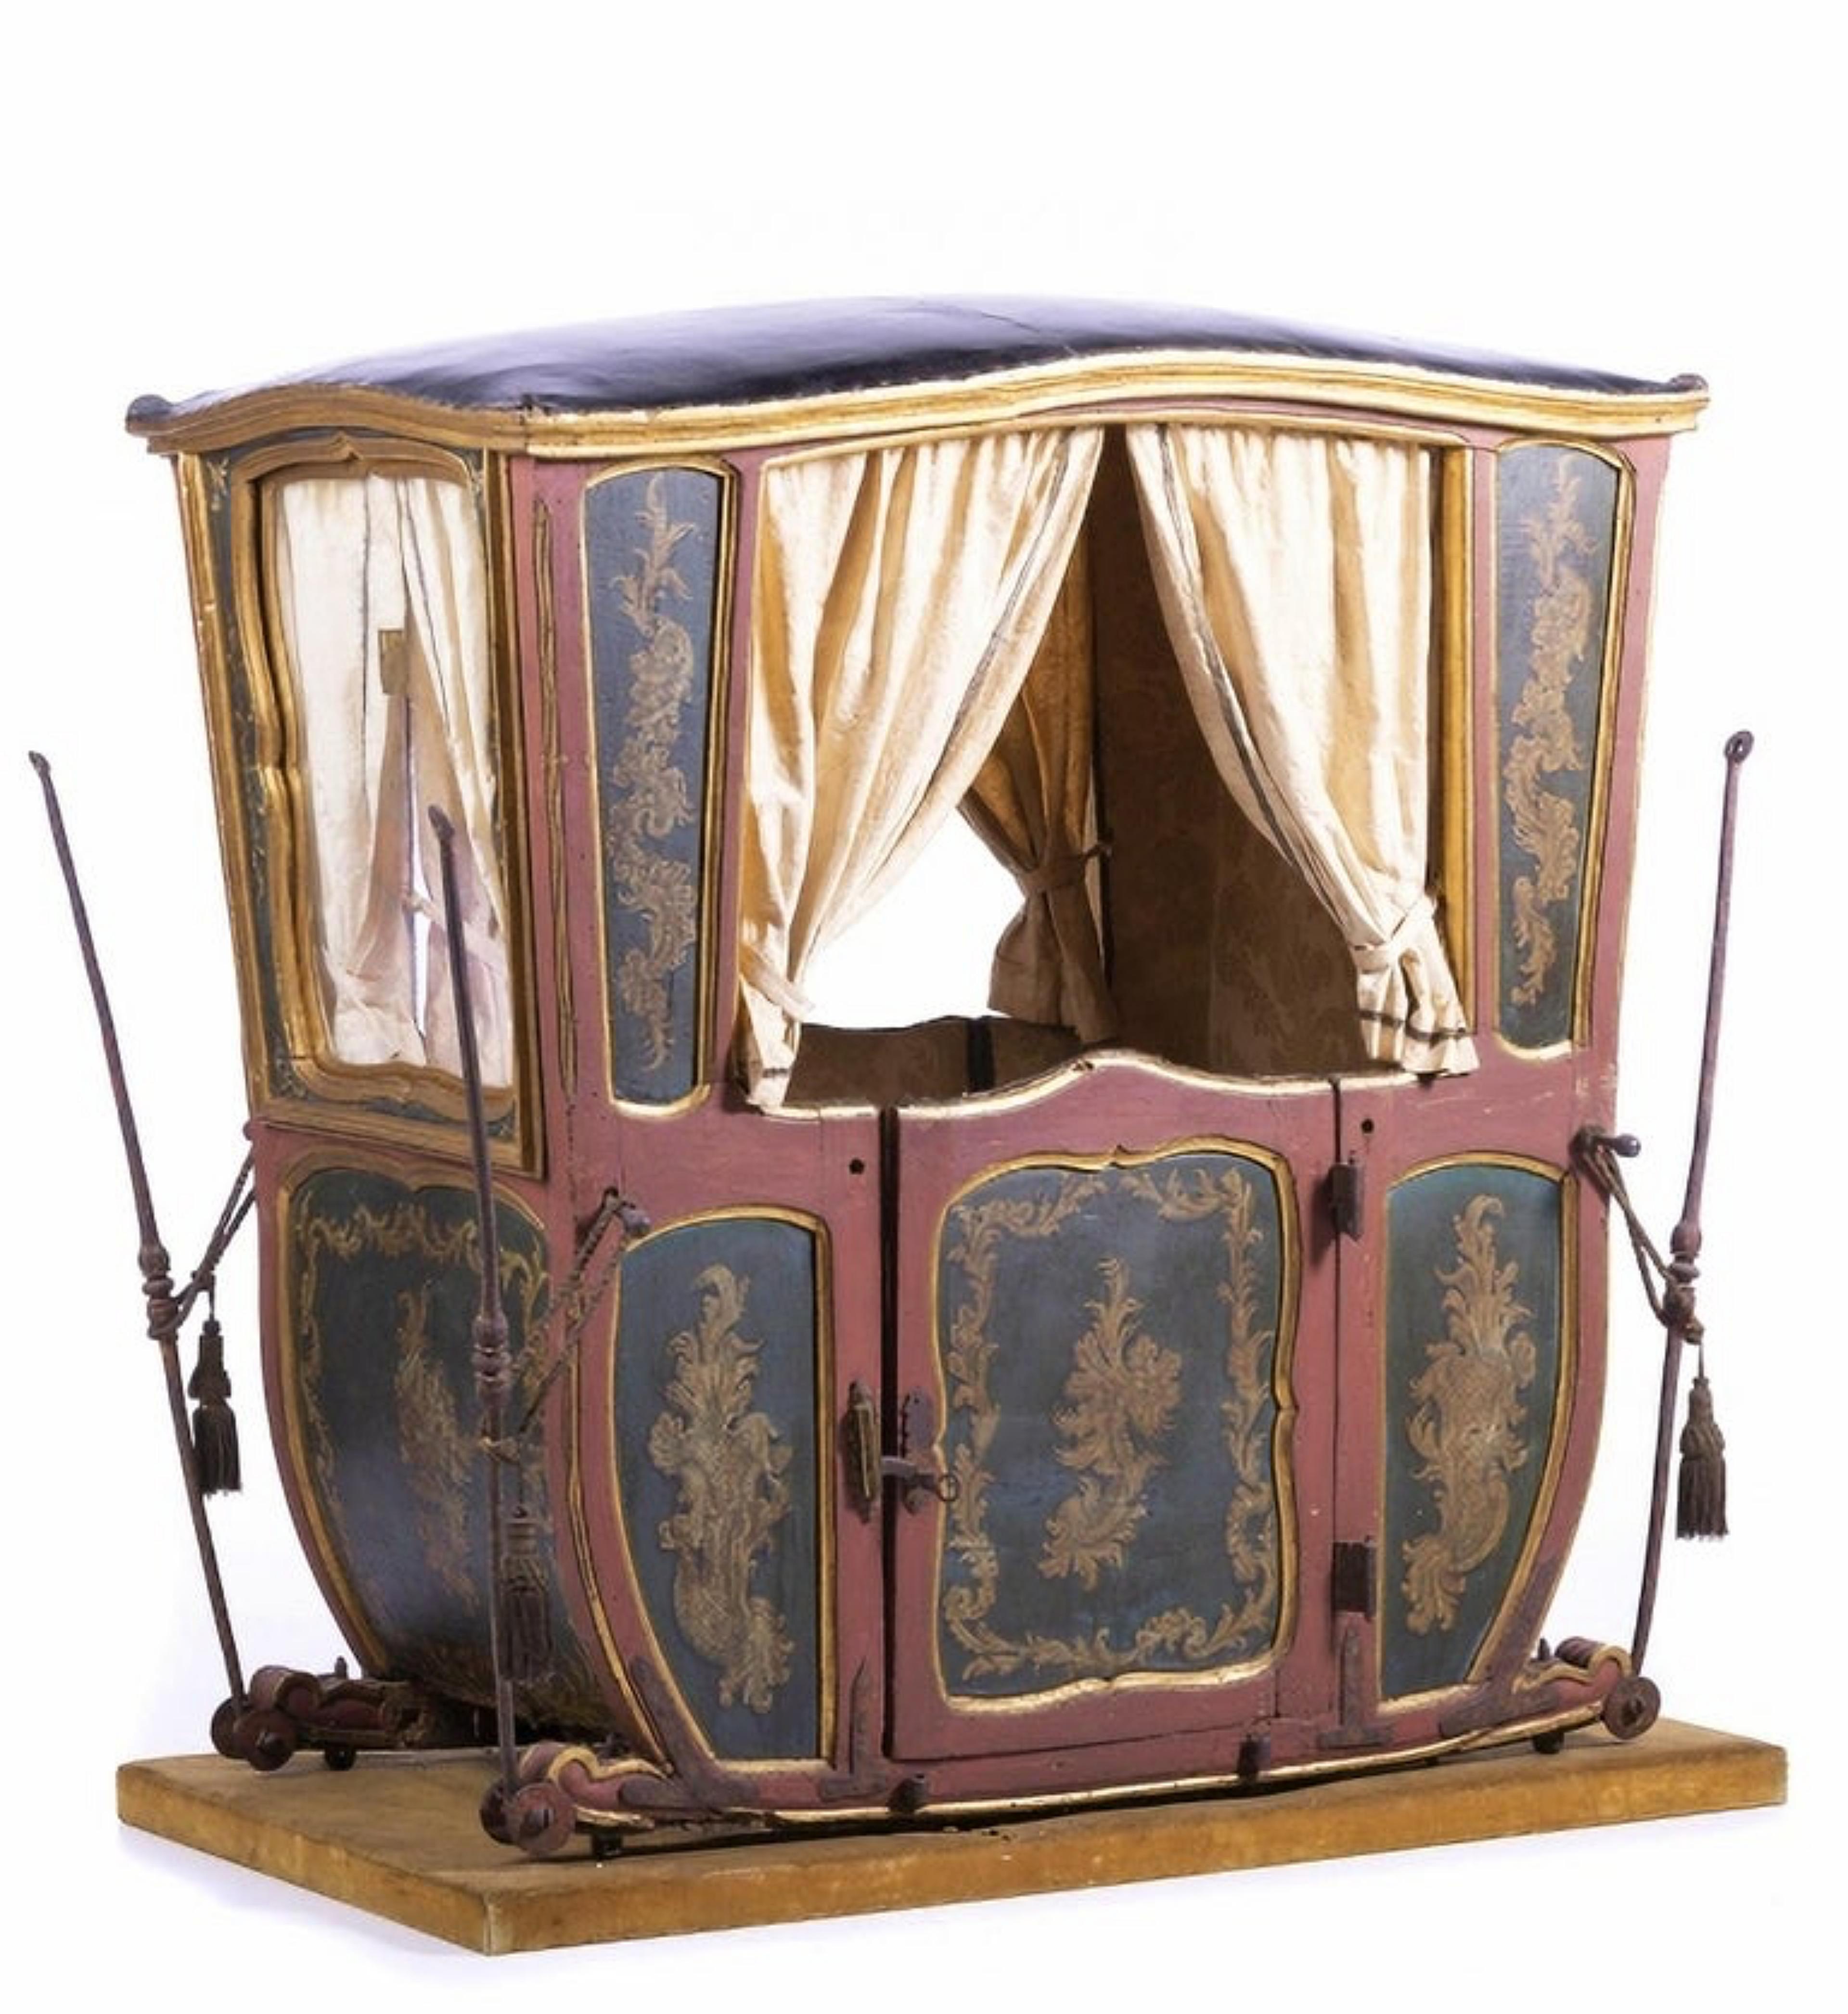 Sedan chair for 2 people

Portuguese 18th century
in carved, painted and gilded wood, fabric-lined interior, leather cover.
Restorations, failures and defects
Dimension: 142 x 136 x 42 cm
Good condition in general.